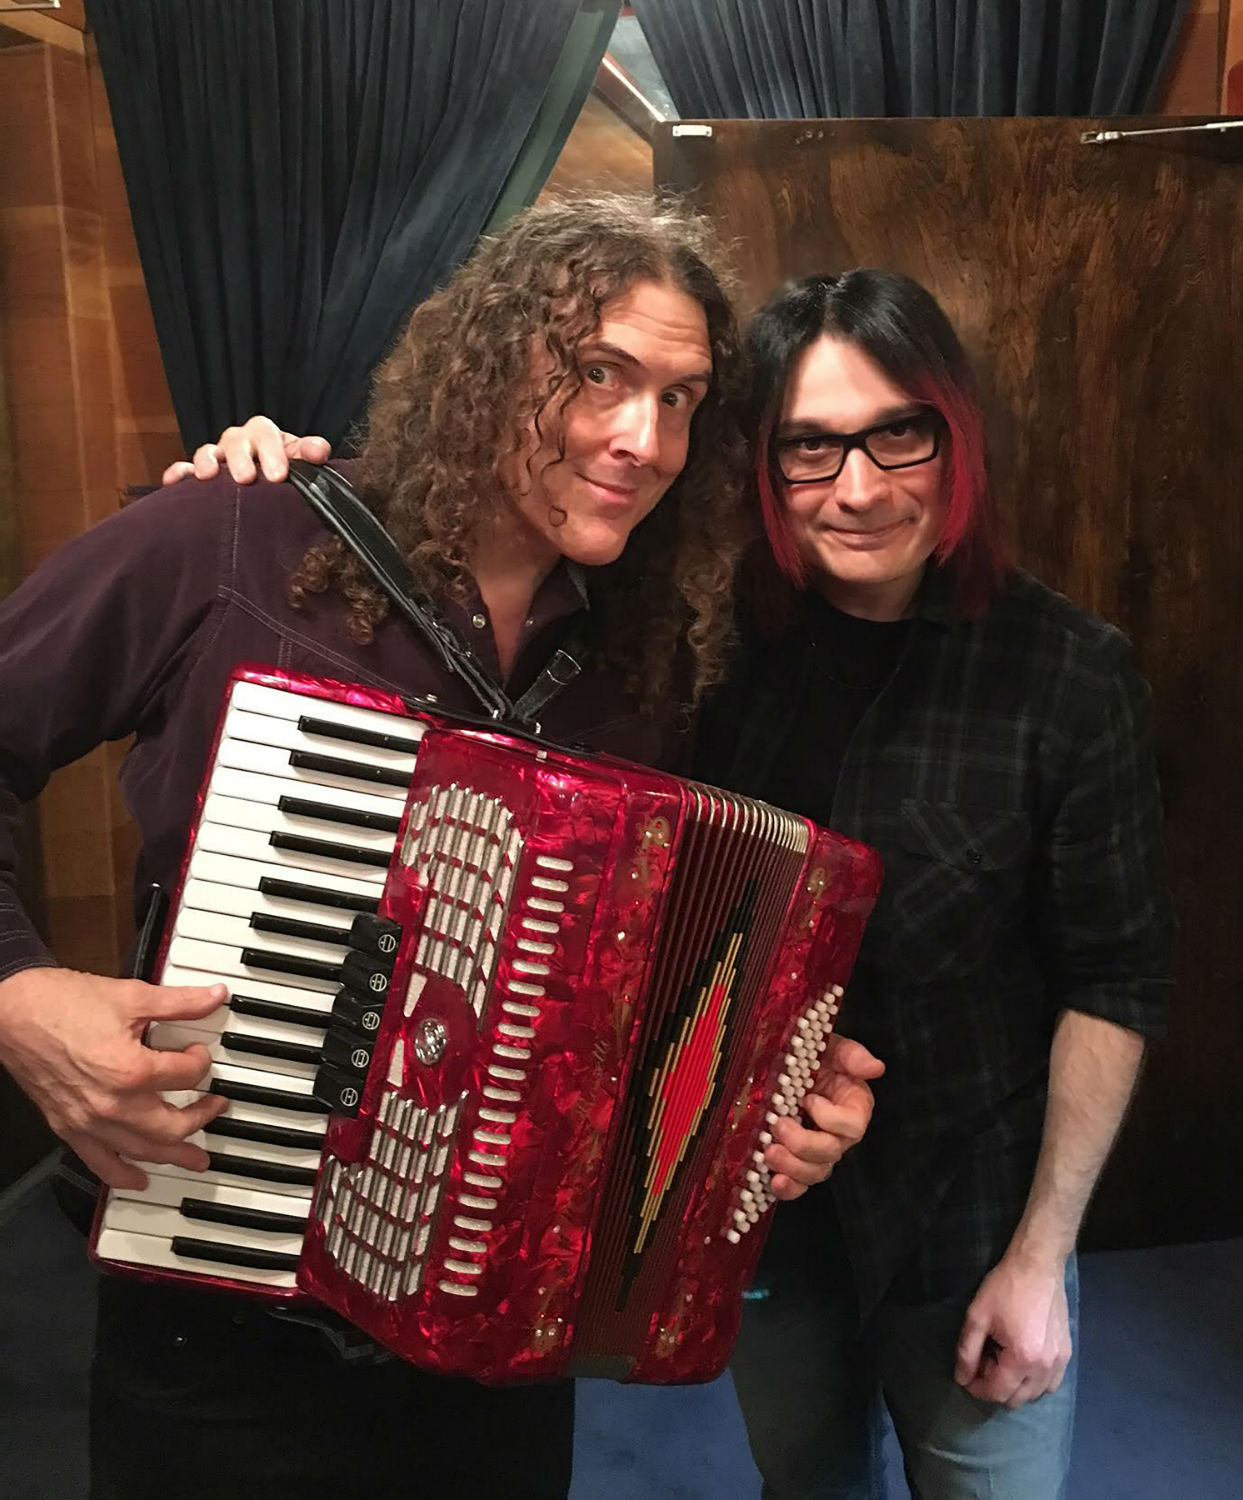 “Weird Al” Yankovic & John Cafiero at Grandmaster Recorders Studio in Los Angeles, CA, recording “Beat on the Brat”  © 2018 Caf Muzeck, LLC. All Rights Reserved